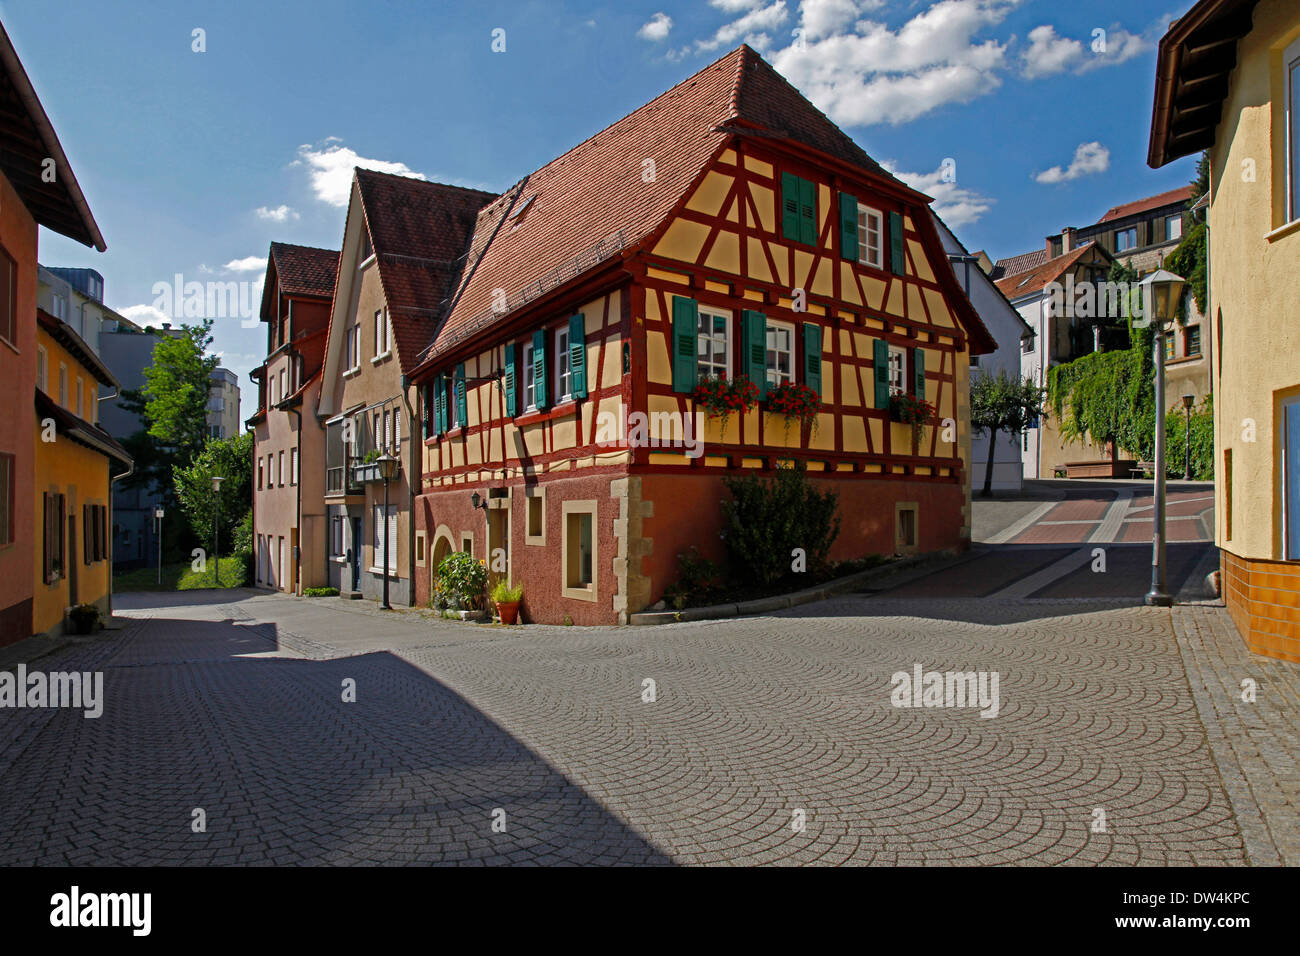 Old Town, historic half-timbered house, built in 1748, Bretten, Kraichgau, district of Karlsruhe, Baden-Wurttemberg, Baden-Württemberg, Germany Stock Photo